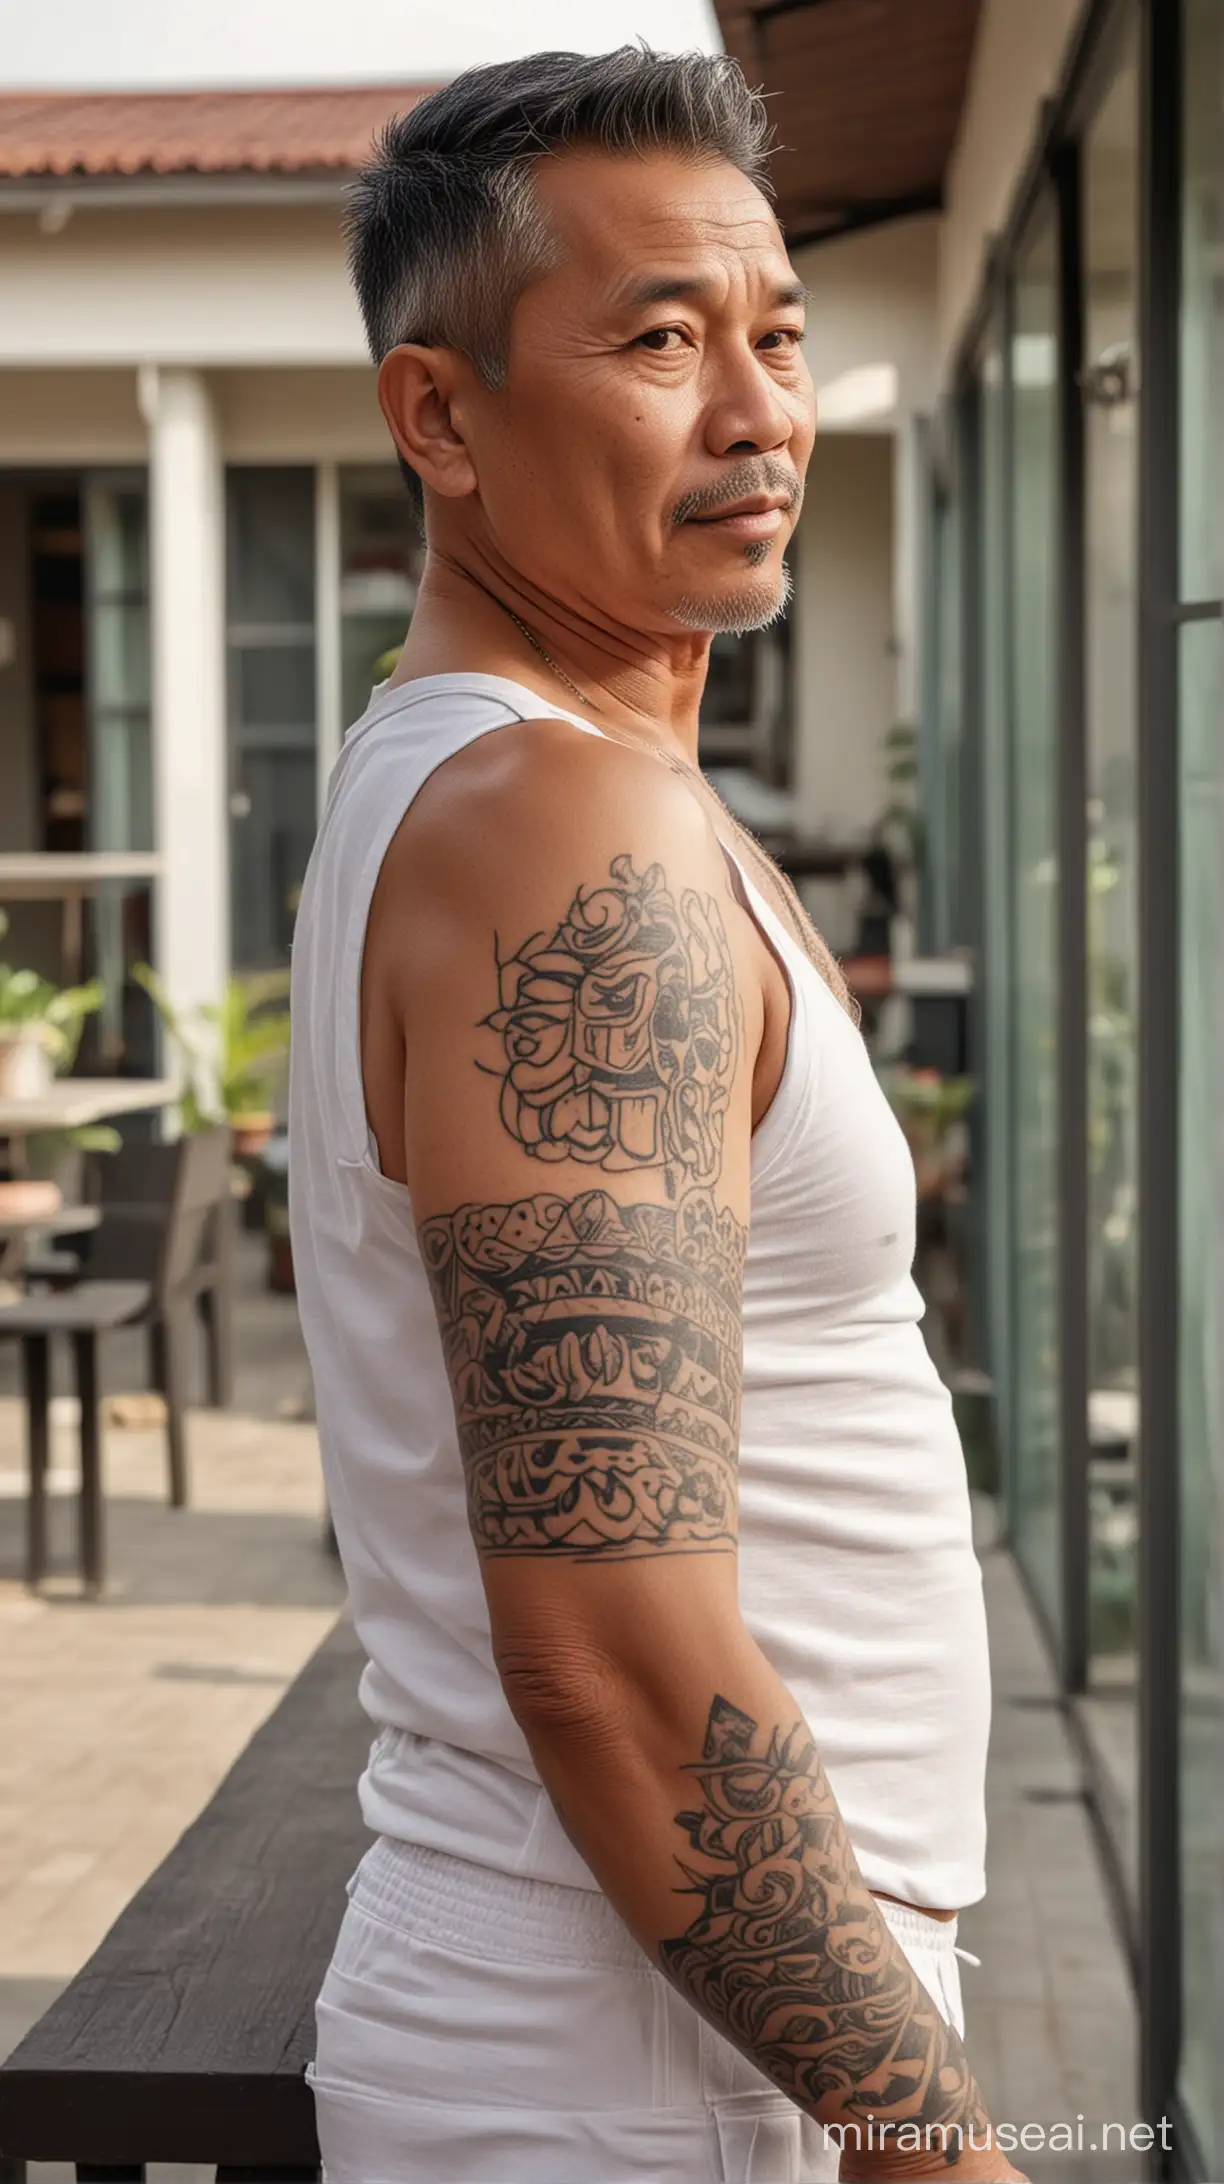 Mature Indonesian Man in White Tank Top Standing on House Terrace